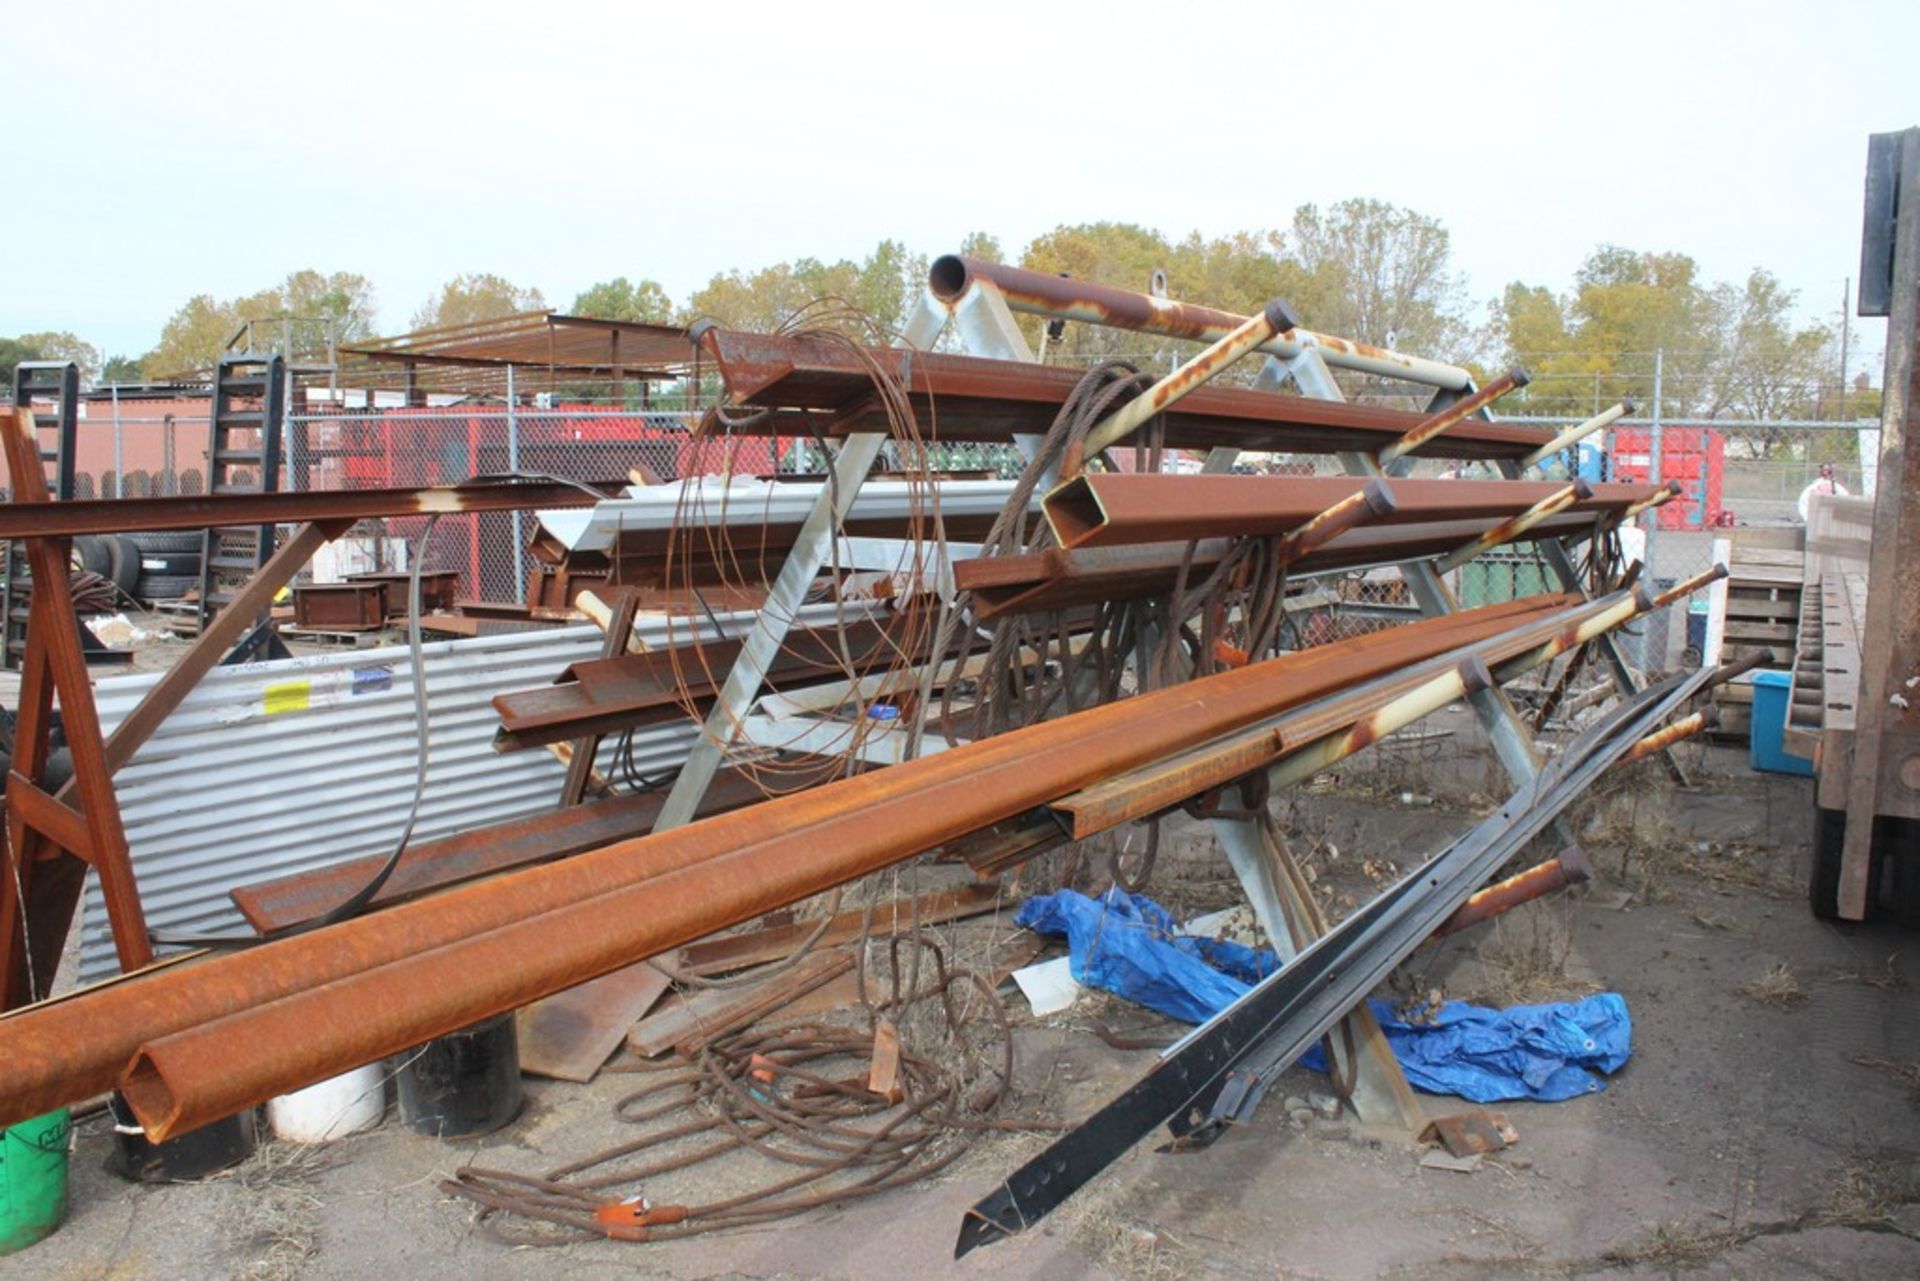 ASSORTED STEEL ON CANTILEVER RACK, 78" X 16' X 8', FOUR LEVELS OF ARMS - Image 2 of 2